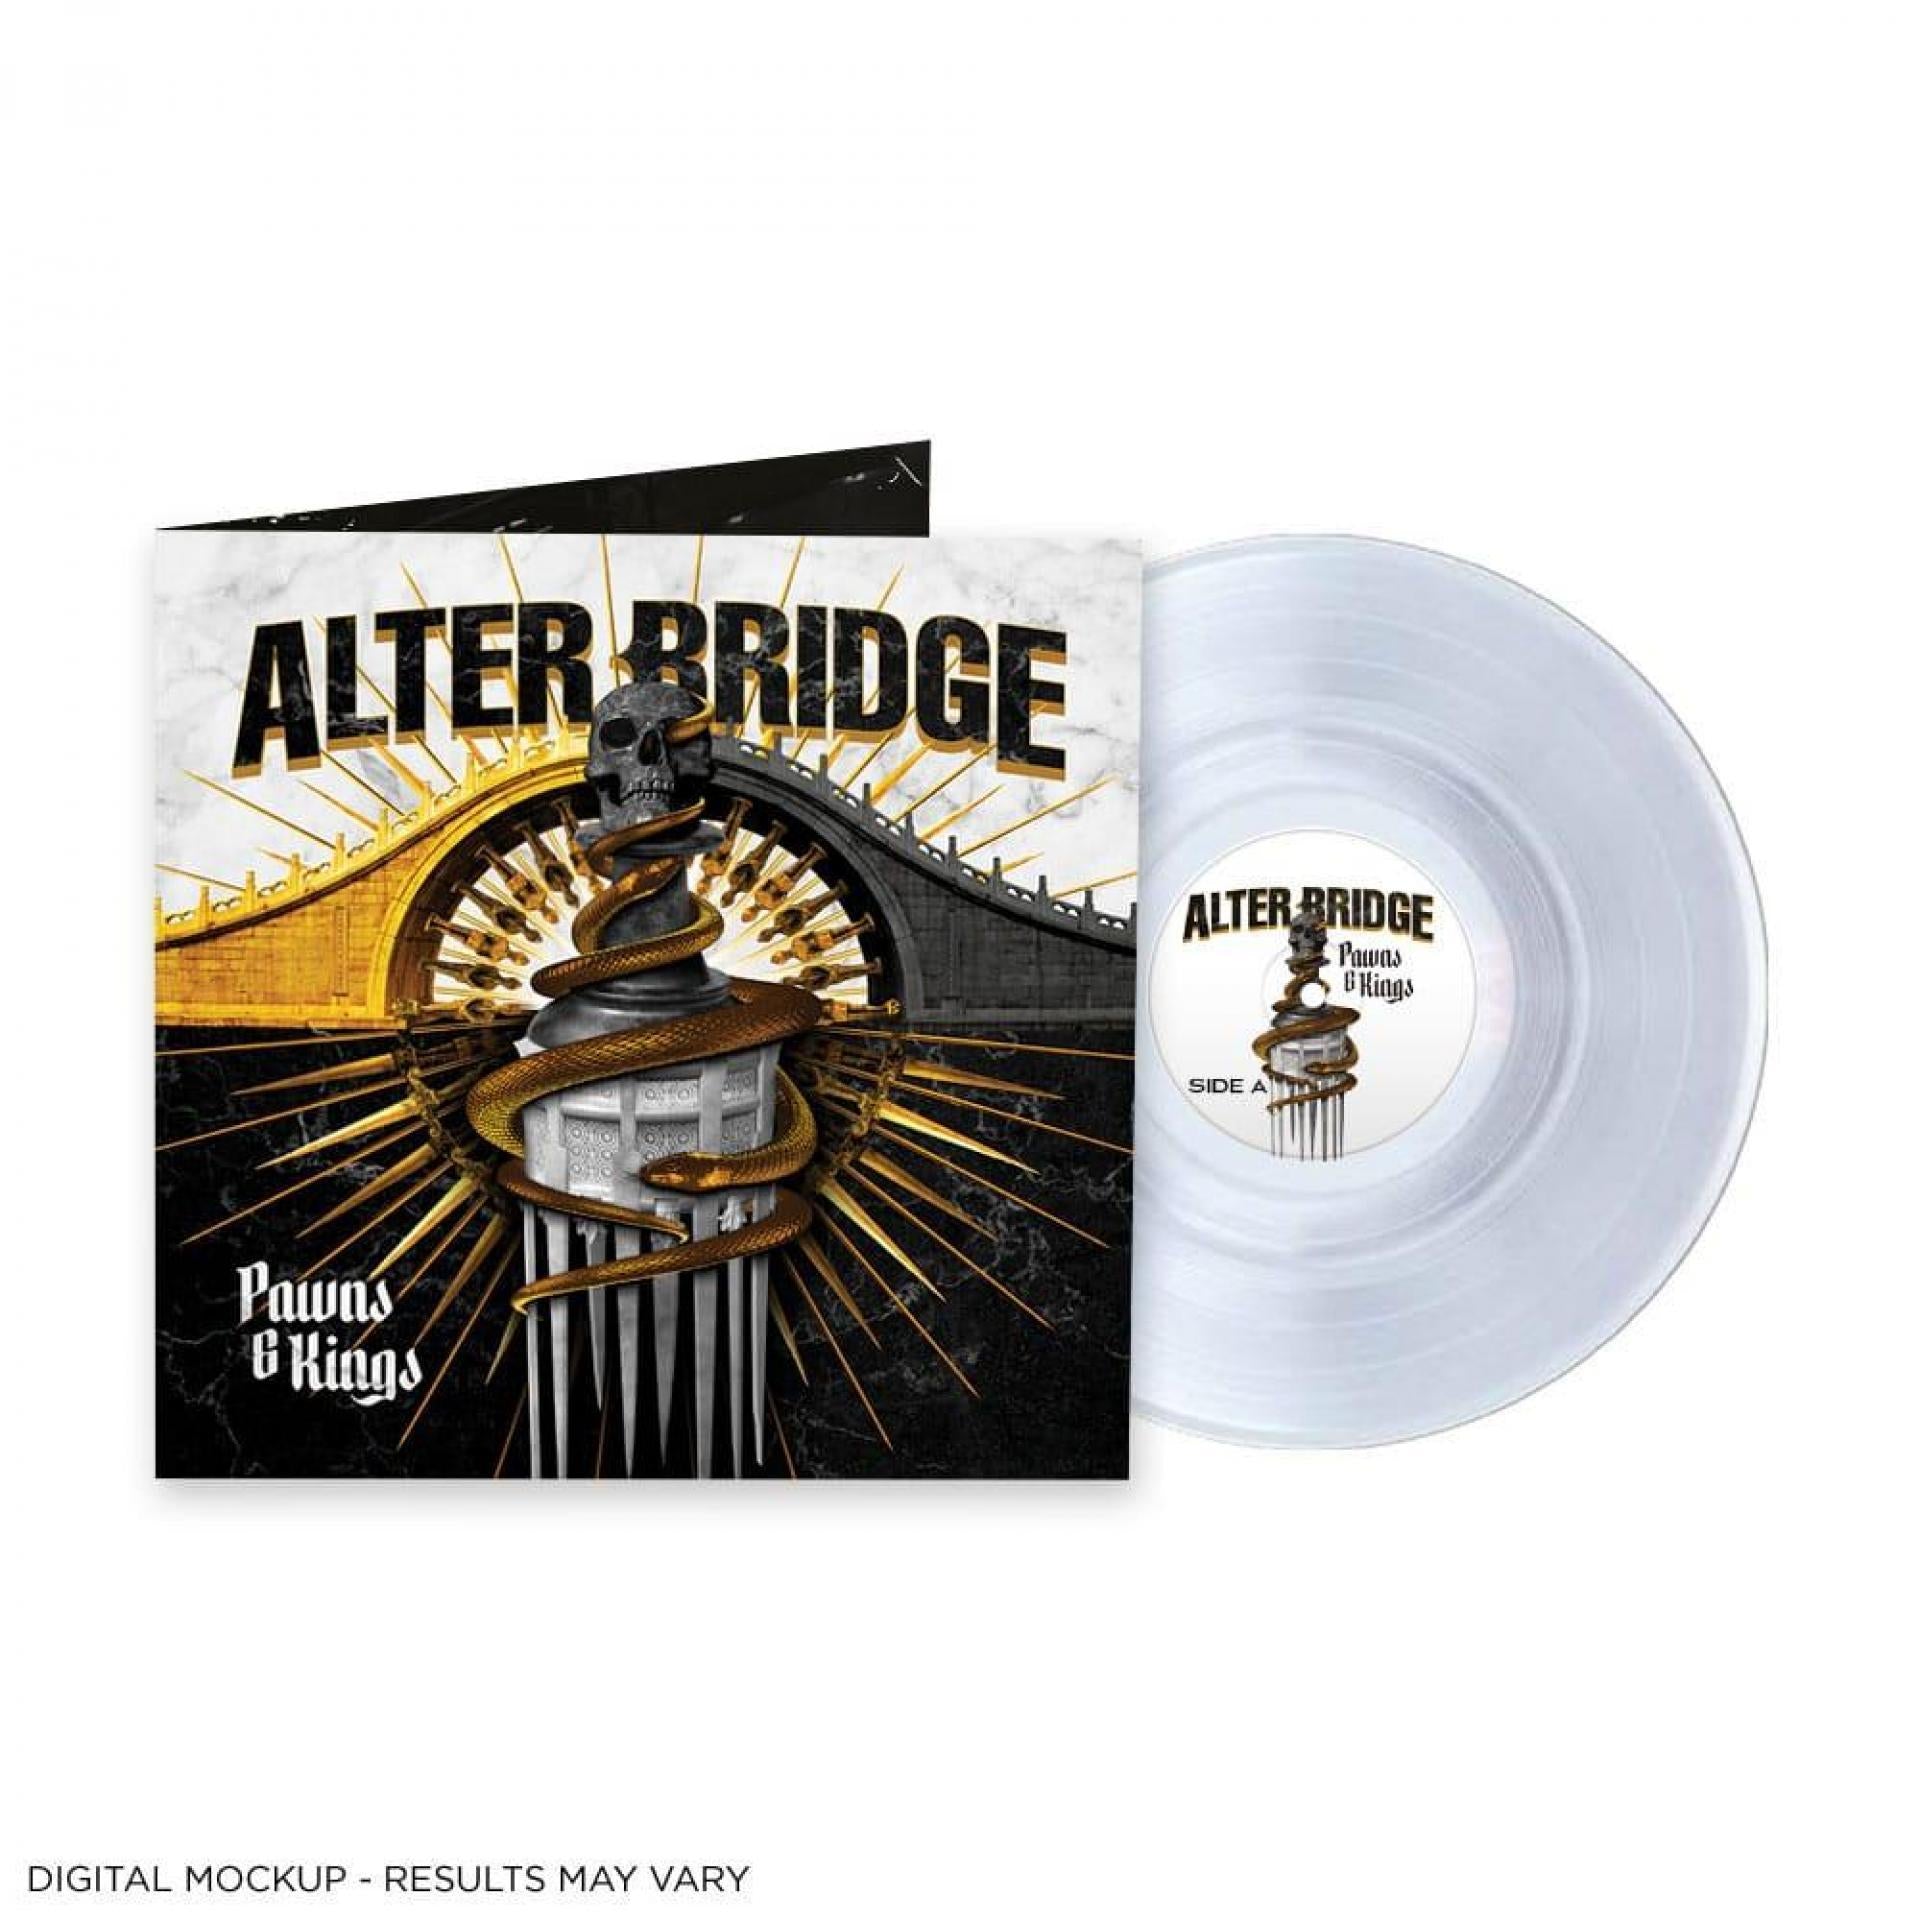 Alter Bridge / Pawns And Kings a staggering new opus in an already  glittering career